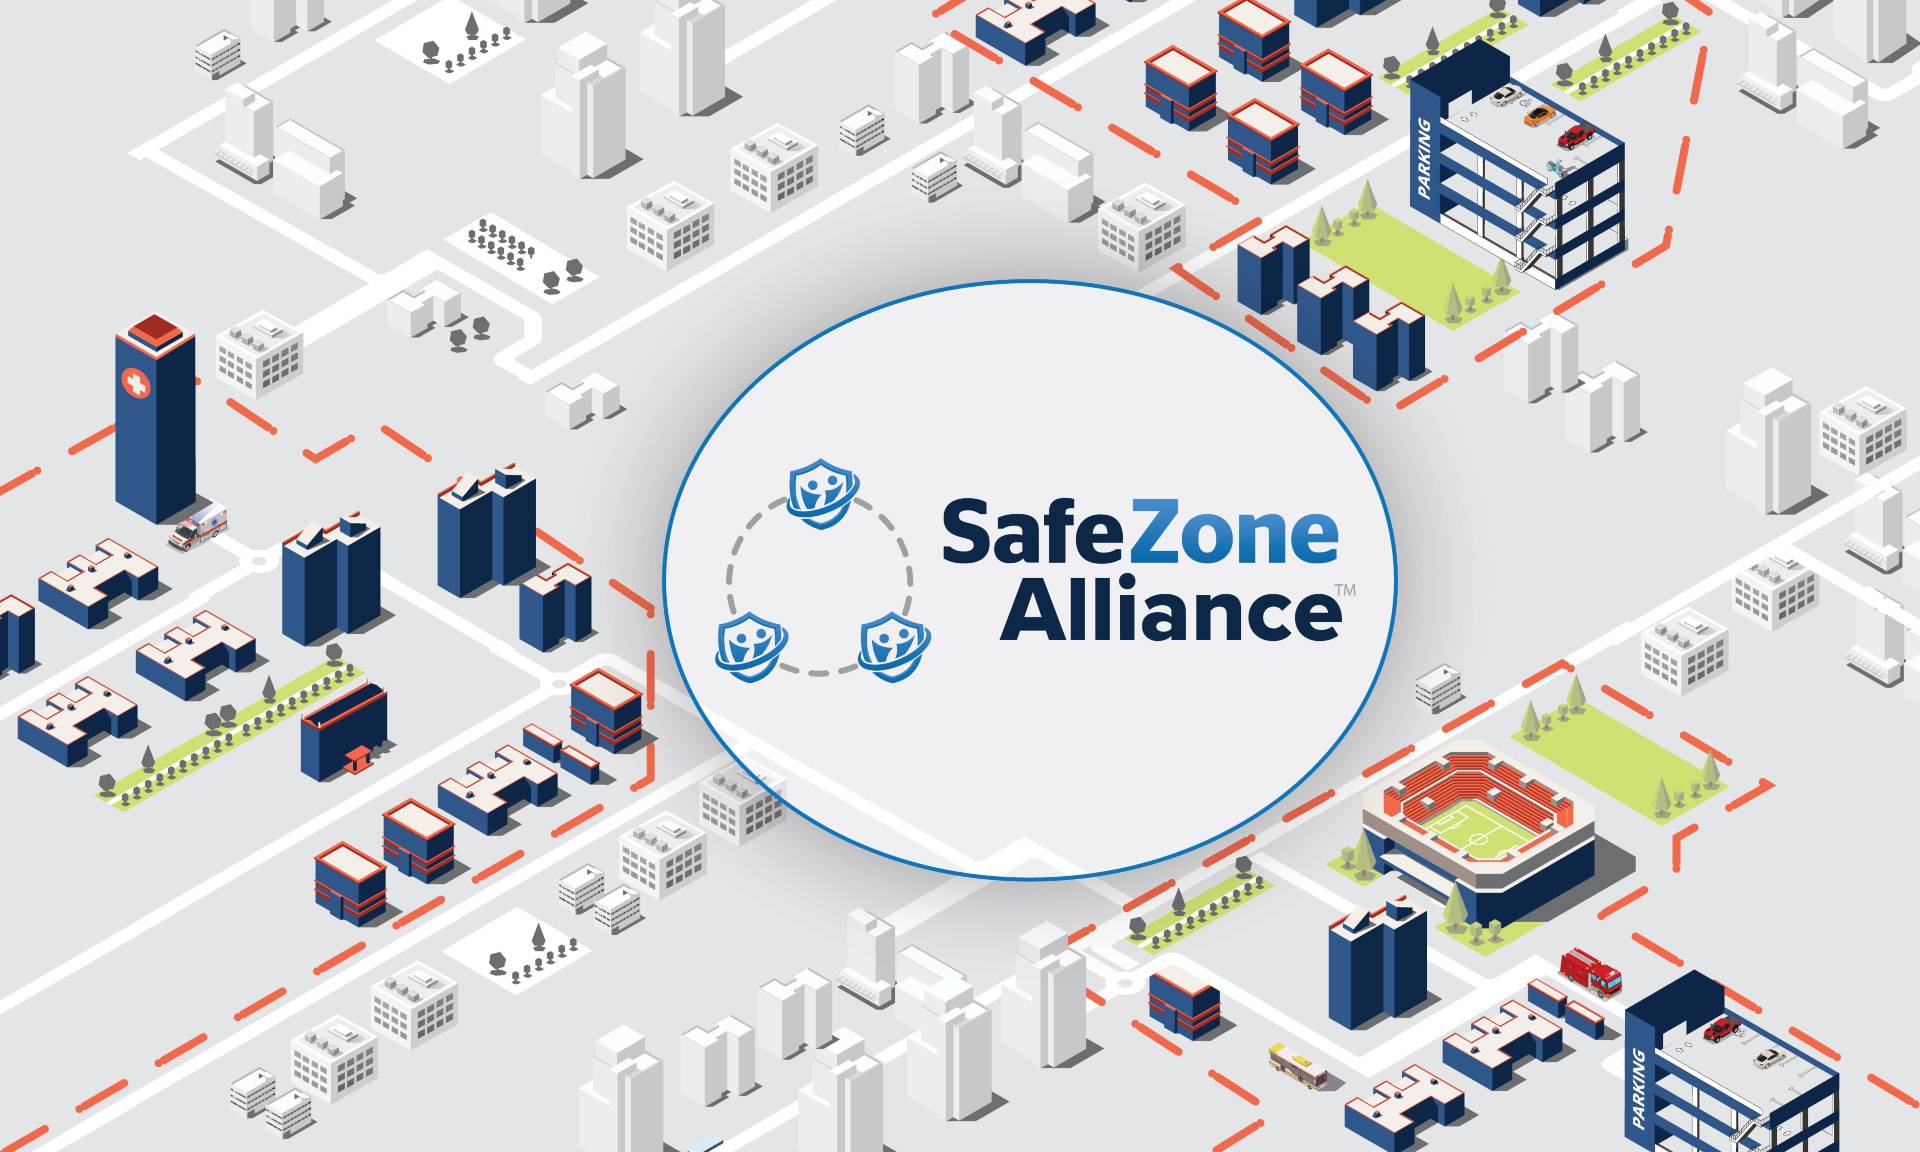 Three Greater Manchester universities pioneer UK’s first city-wide safety and response initiative using innovative digital technology with CriticalArc’s SafeZone